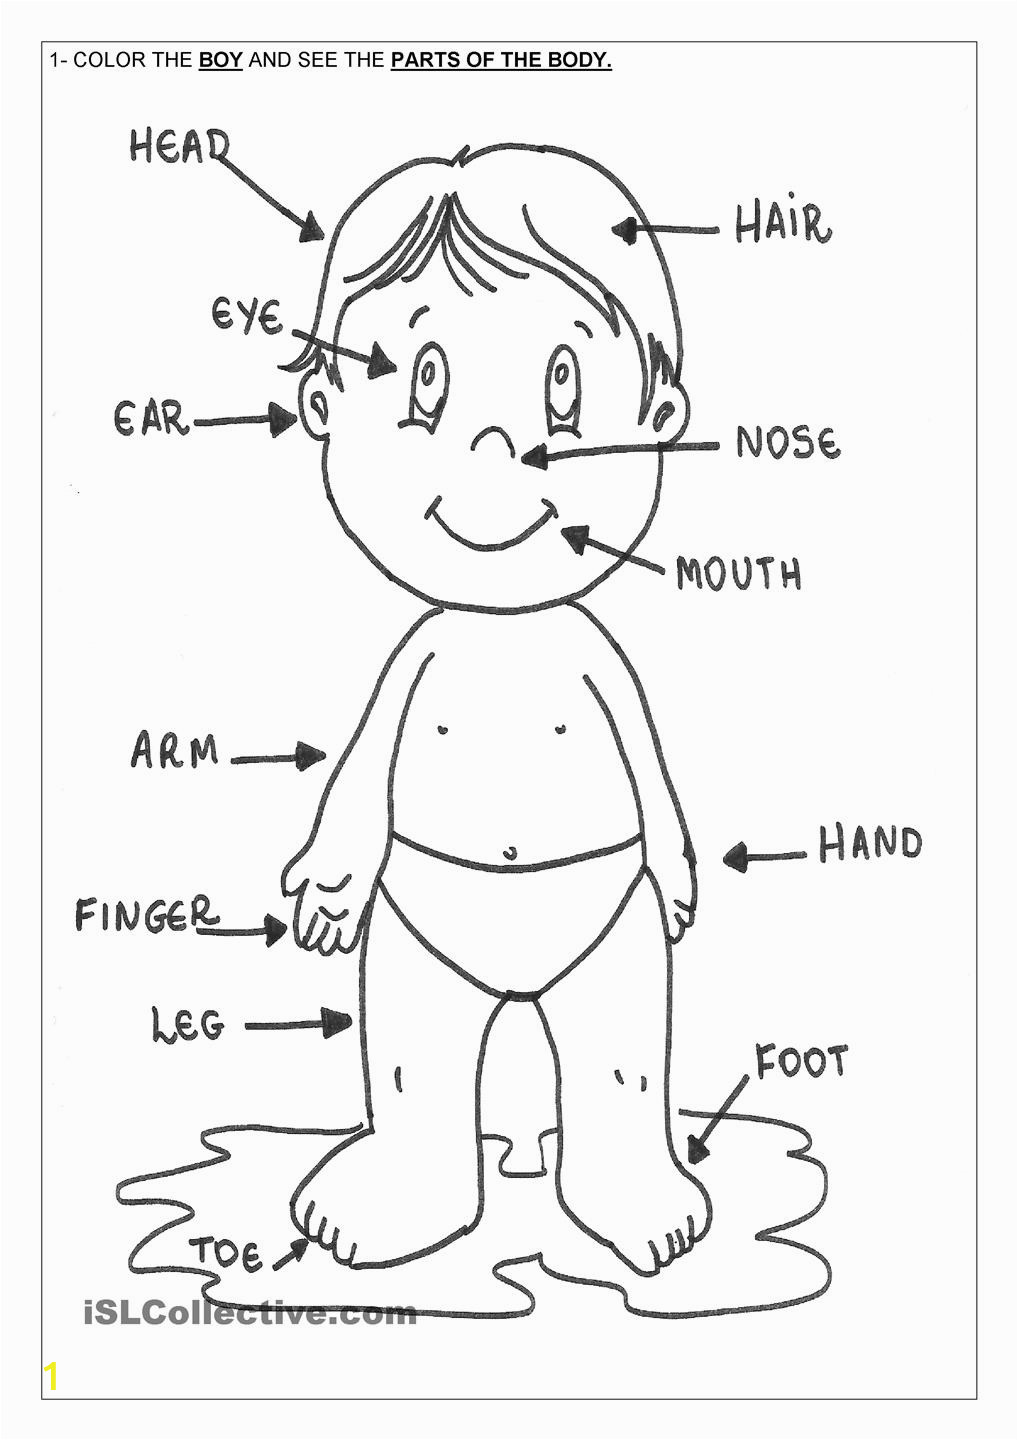 Human Anatomy Coloring Pages for Kids Human Body organs Coloring Pages at Getcolorings